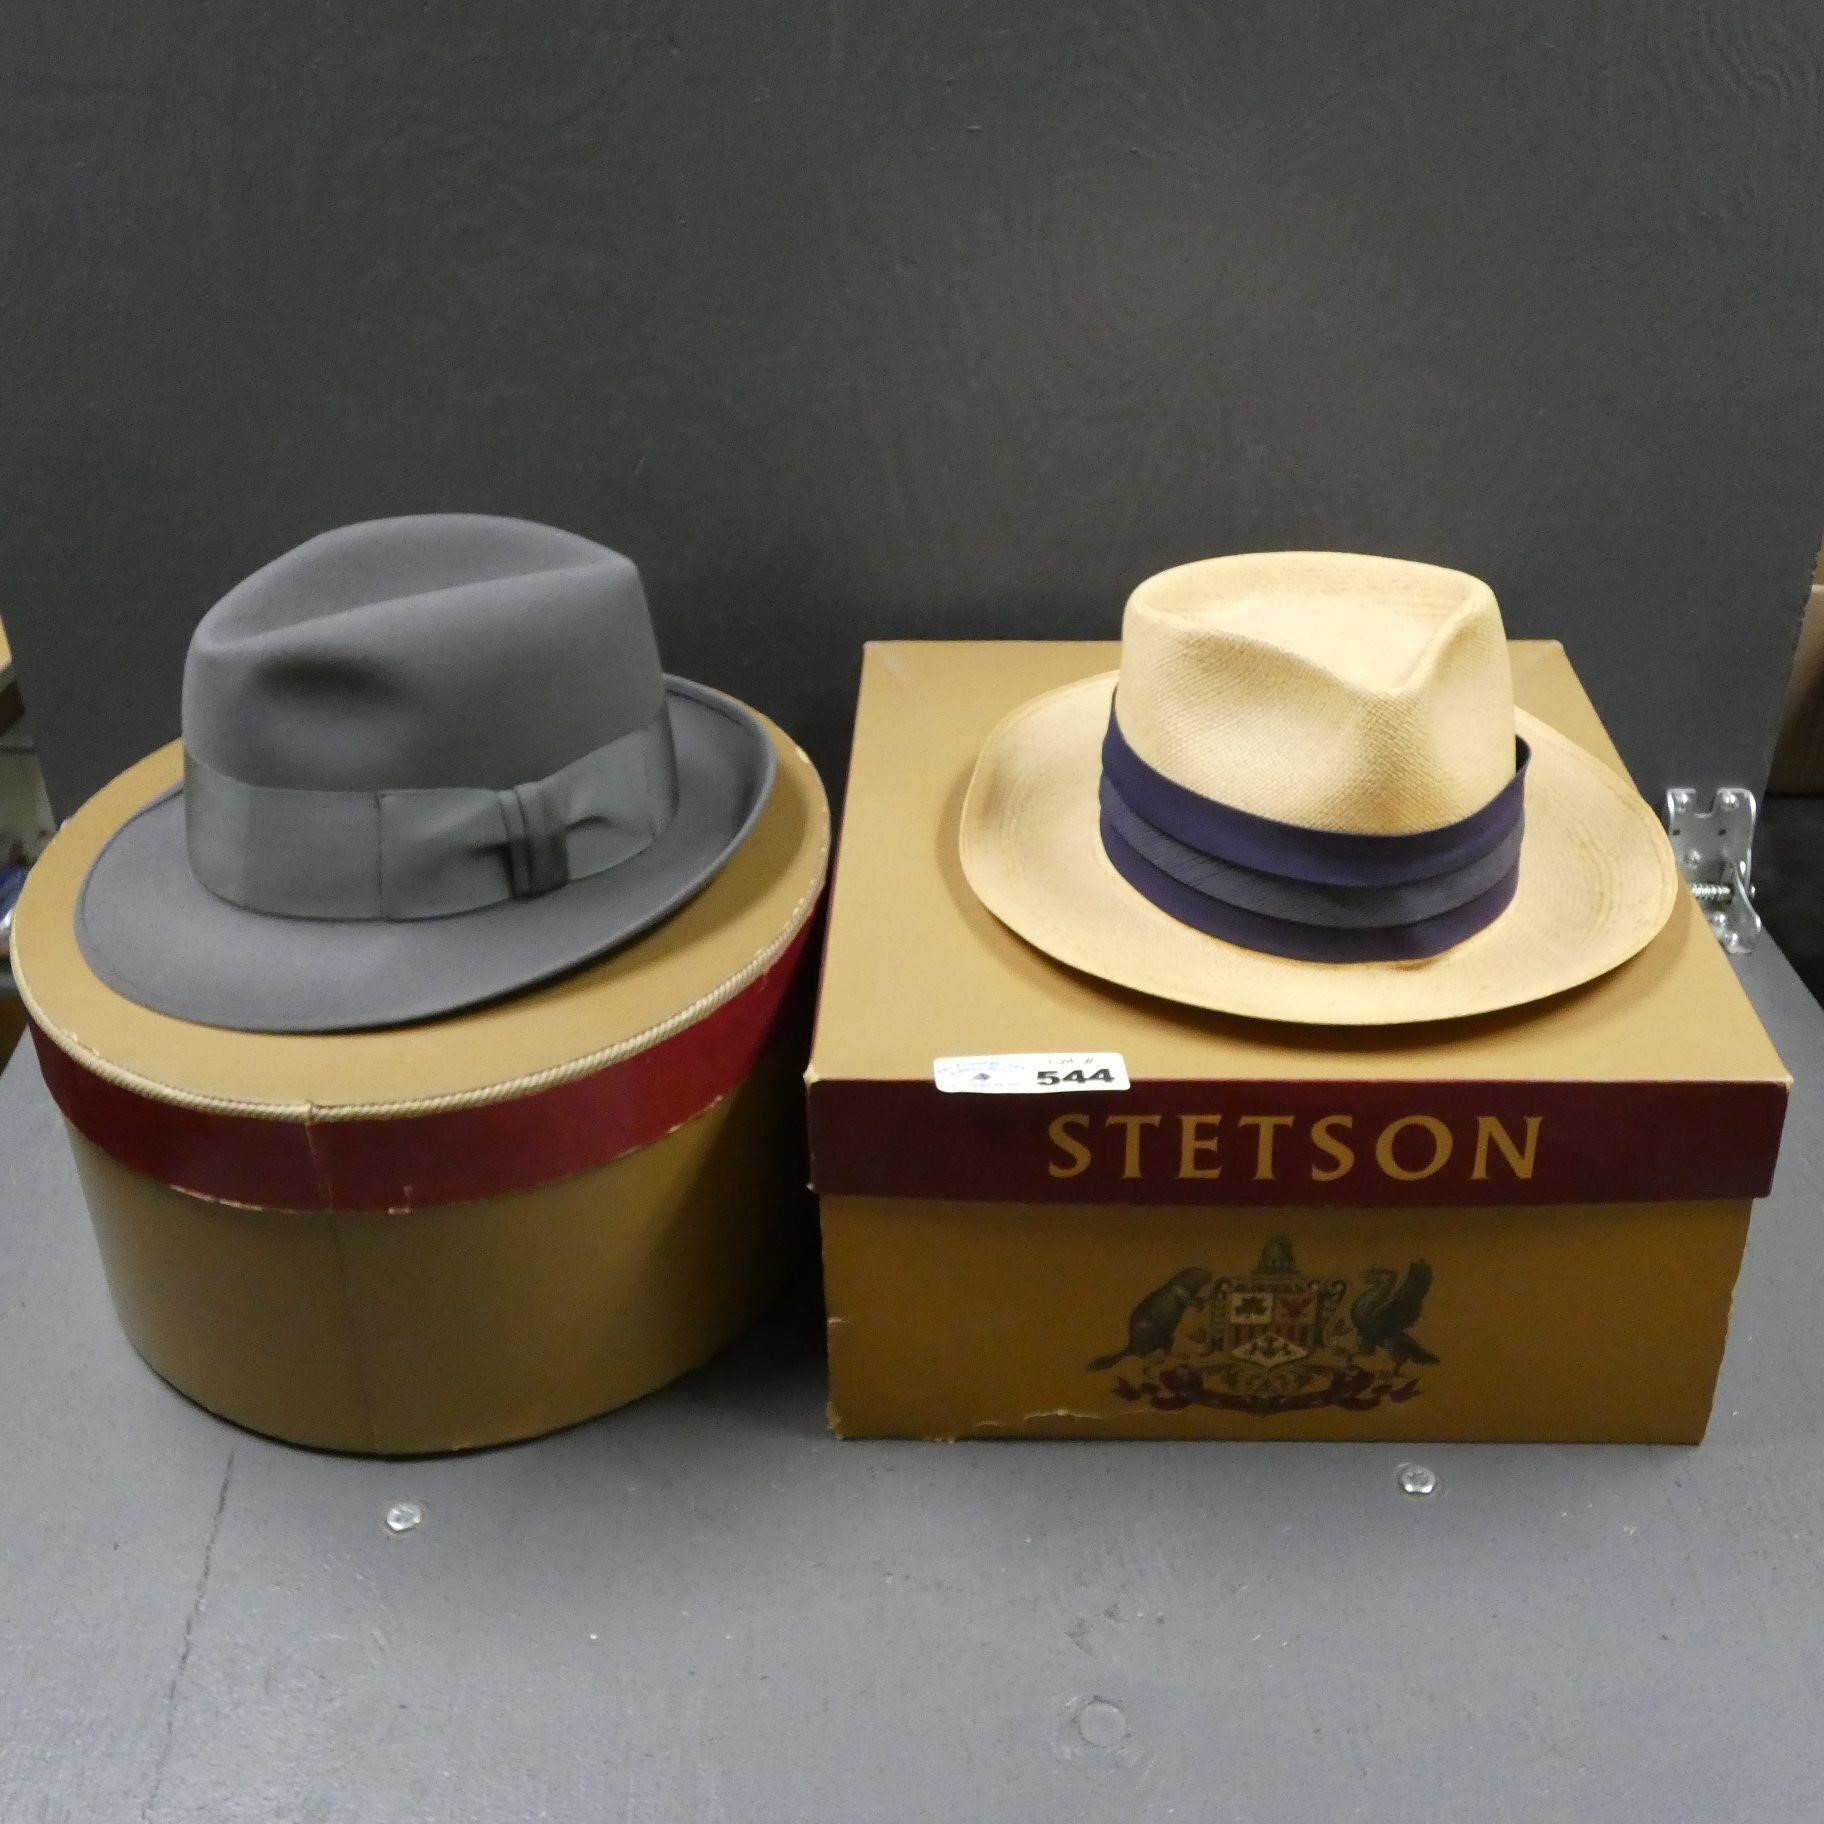 Pair of Vintage Hats - Stetson Hat Box